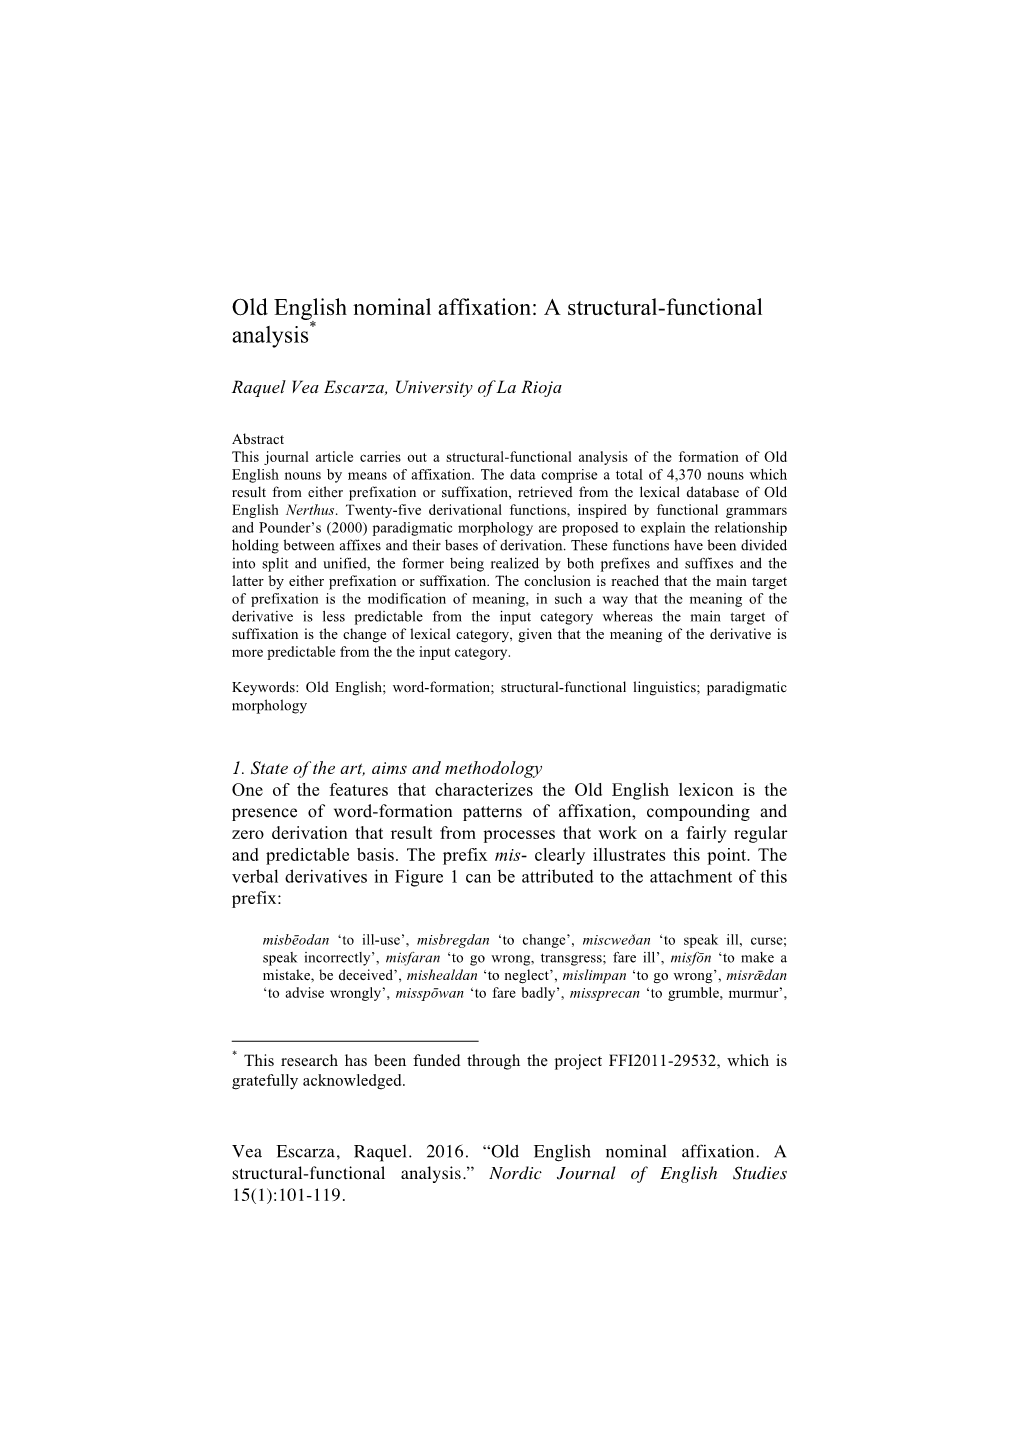 Old English Nominal Affixation: a Structural-Functional Analysis*